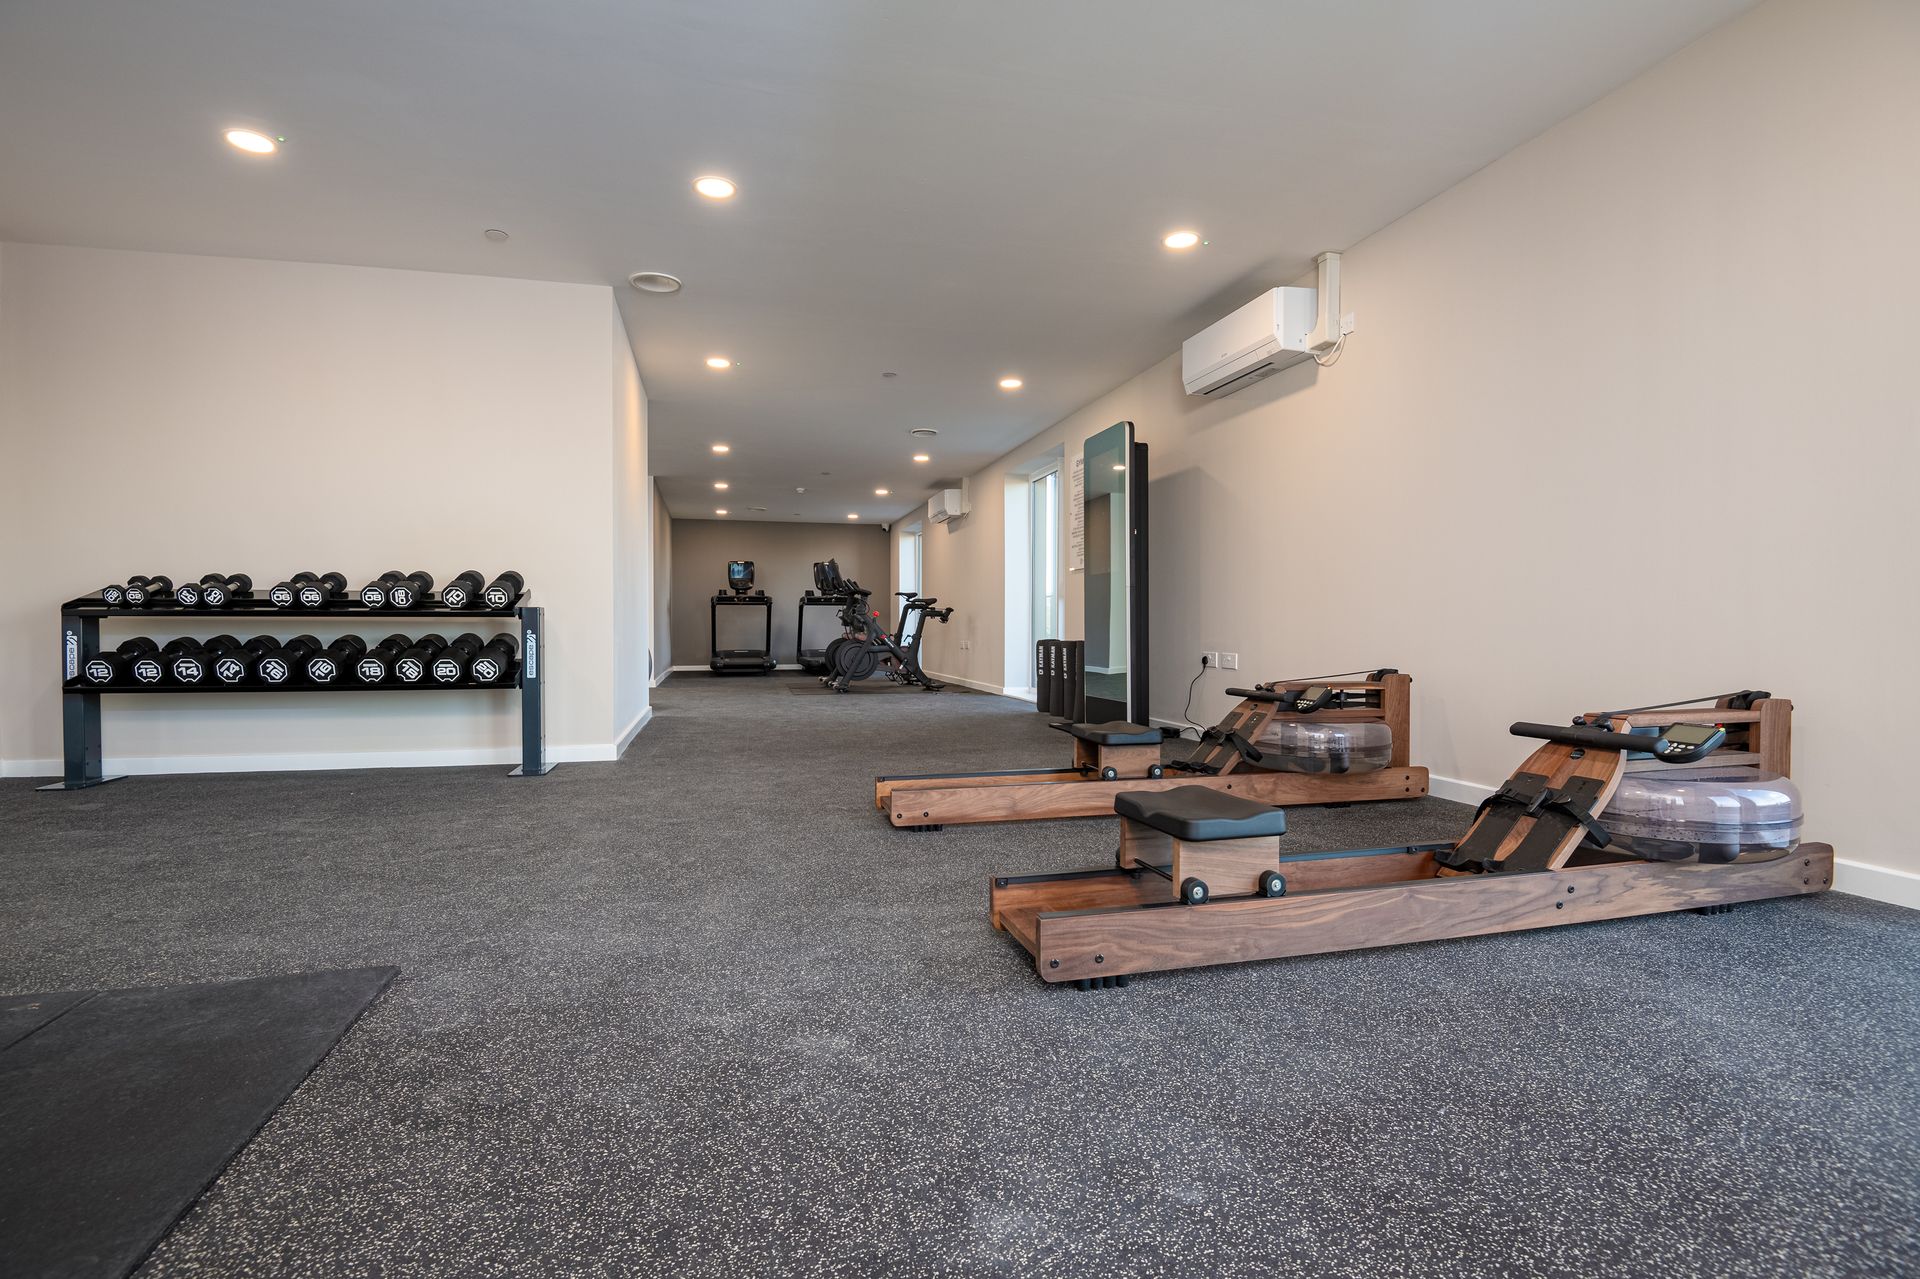 A large room with a lot of exercise equipment in it at Walton Court.